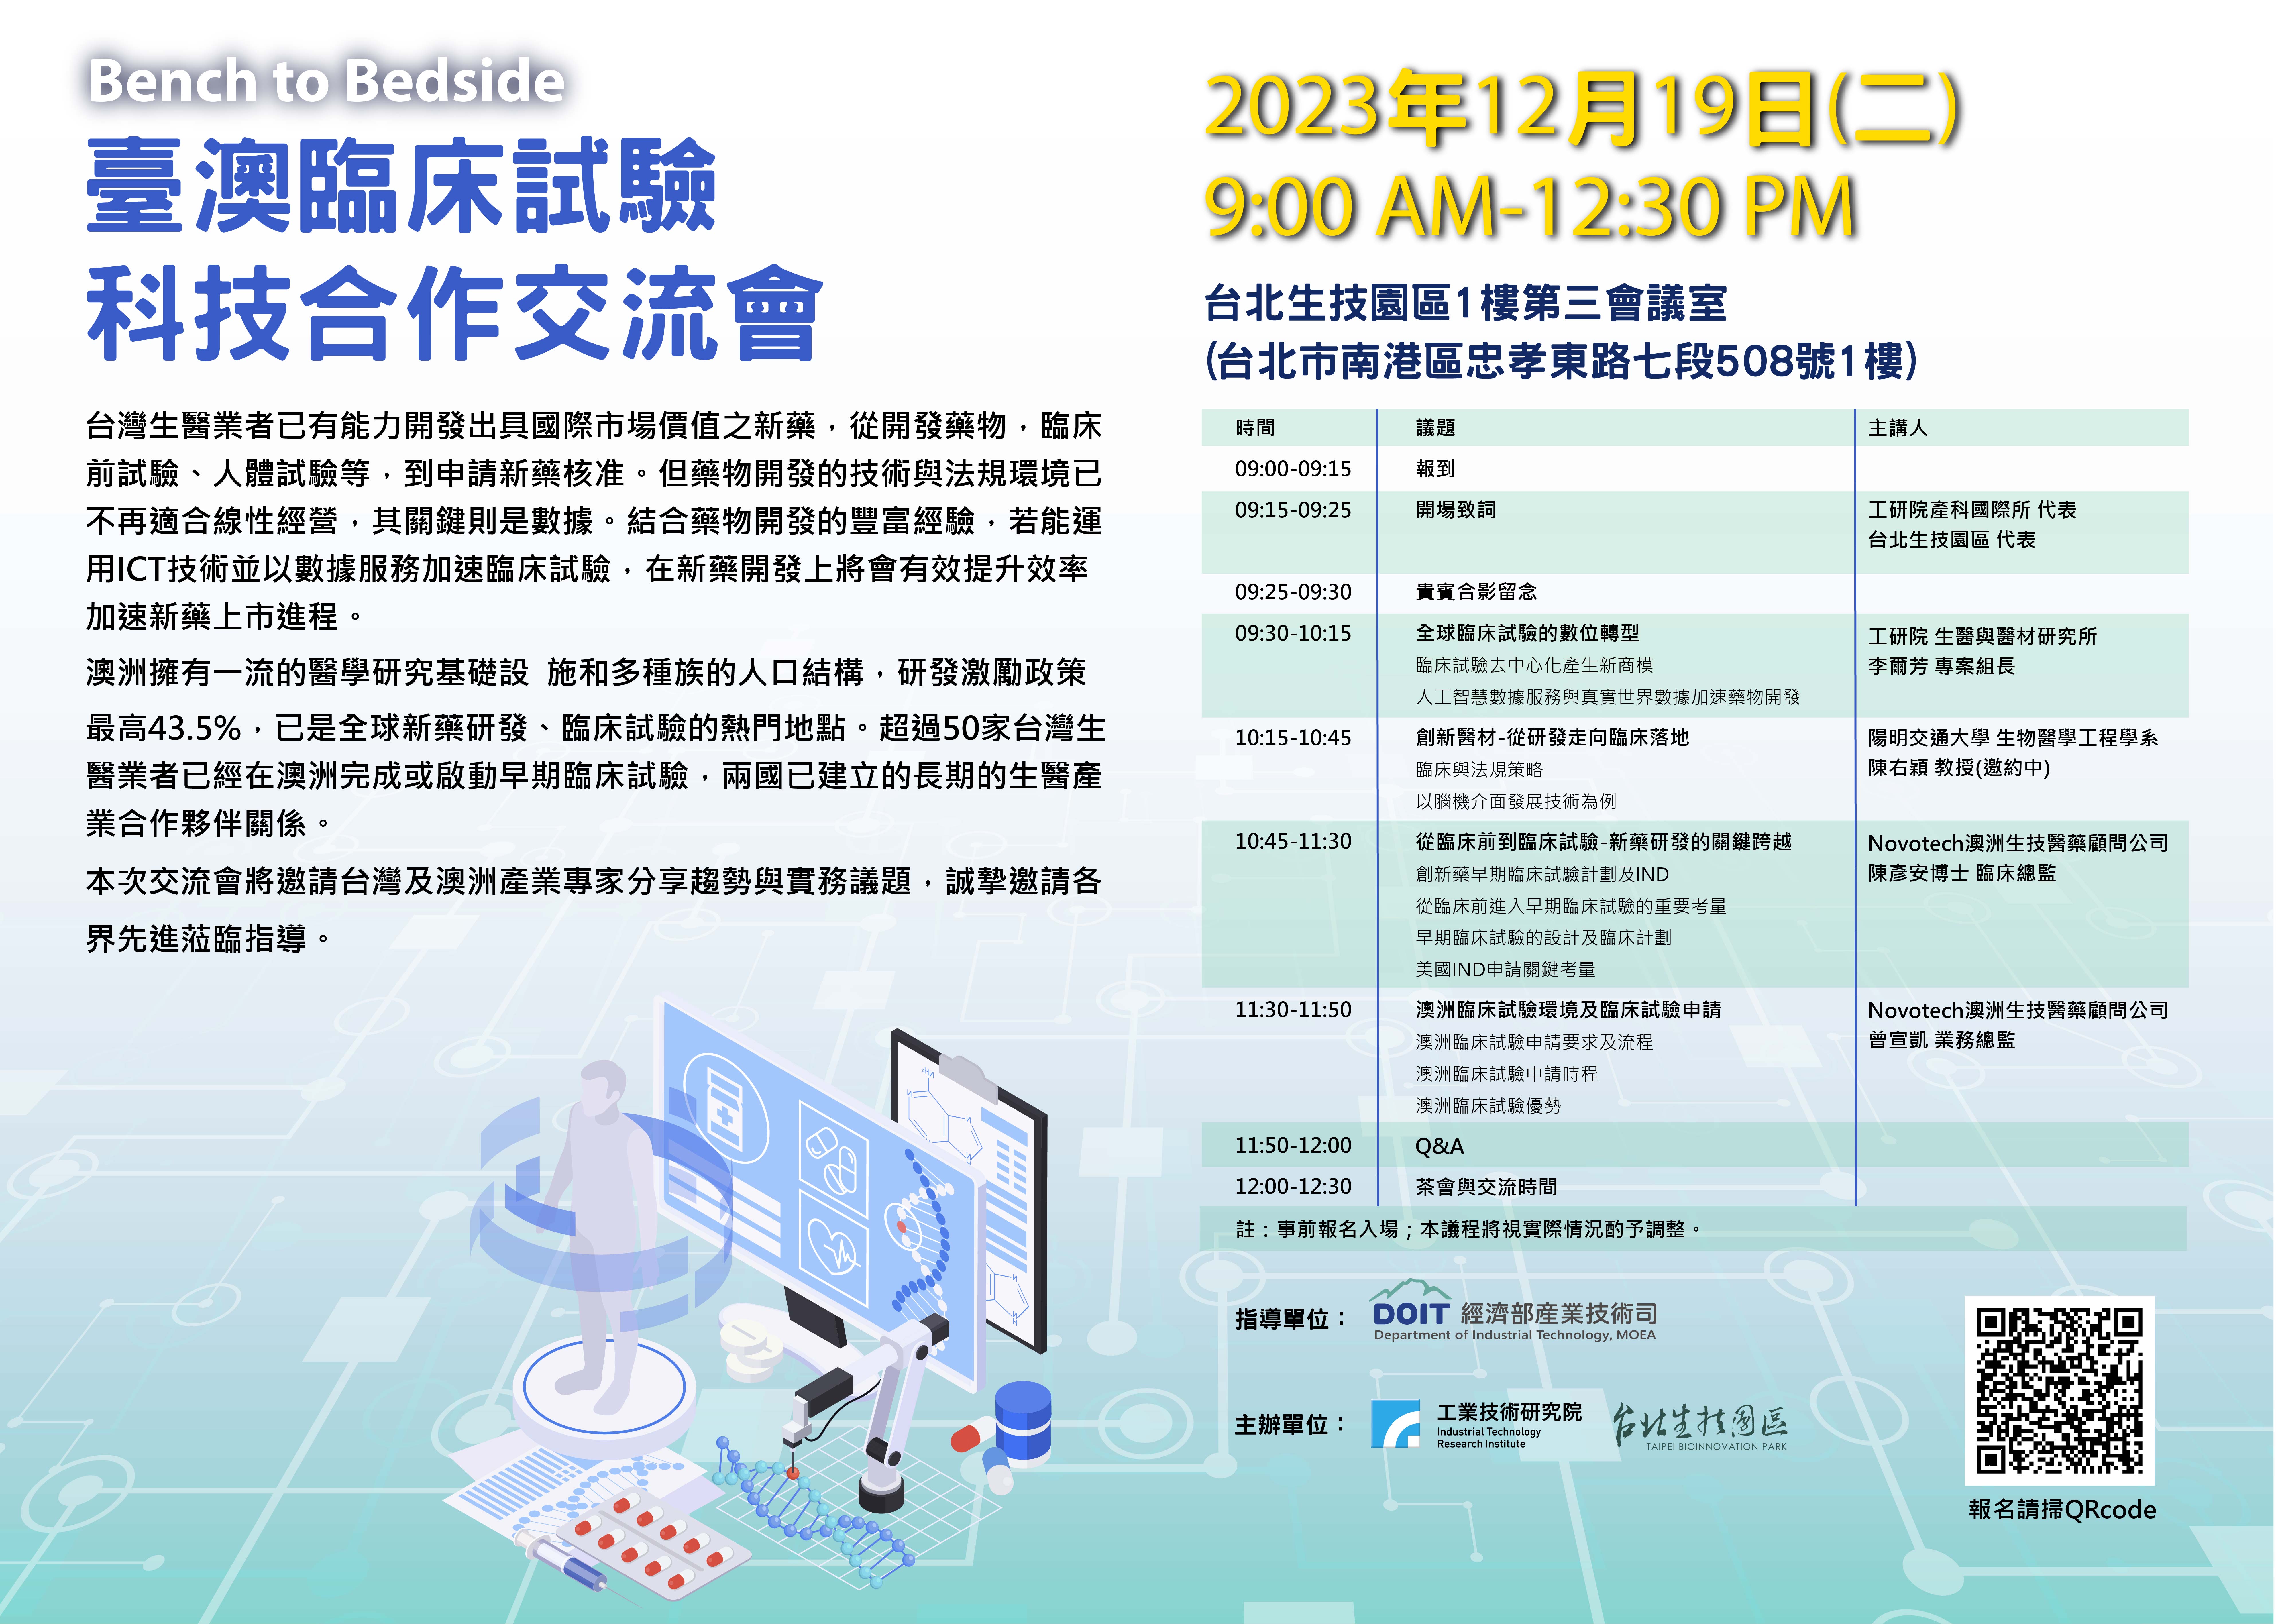 Taiwan-Australia Clinical Trial Technology Cooperation and Exchange Conference